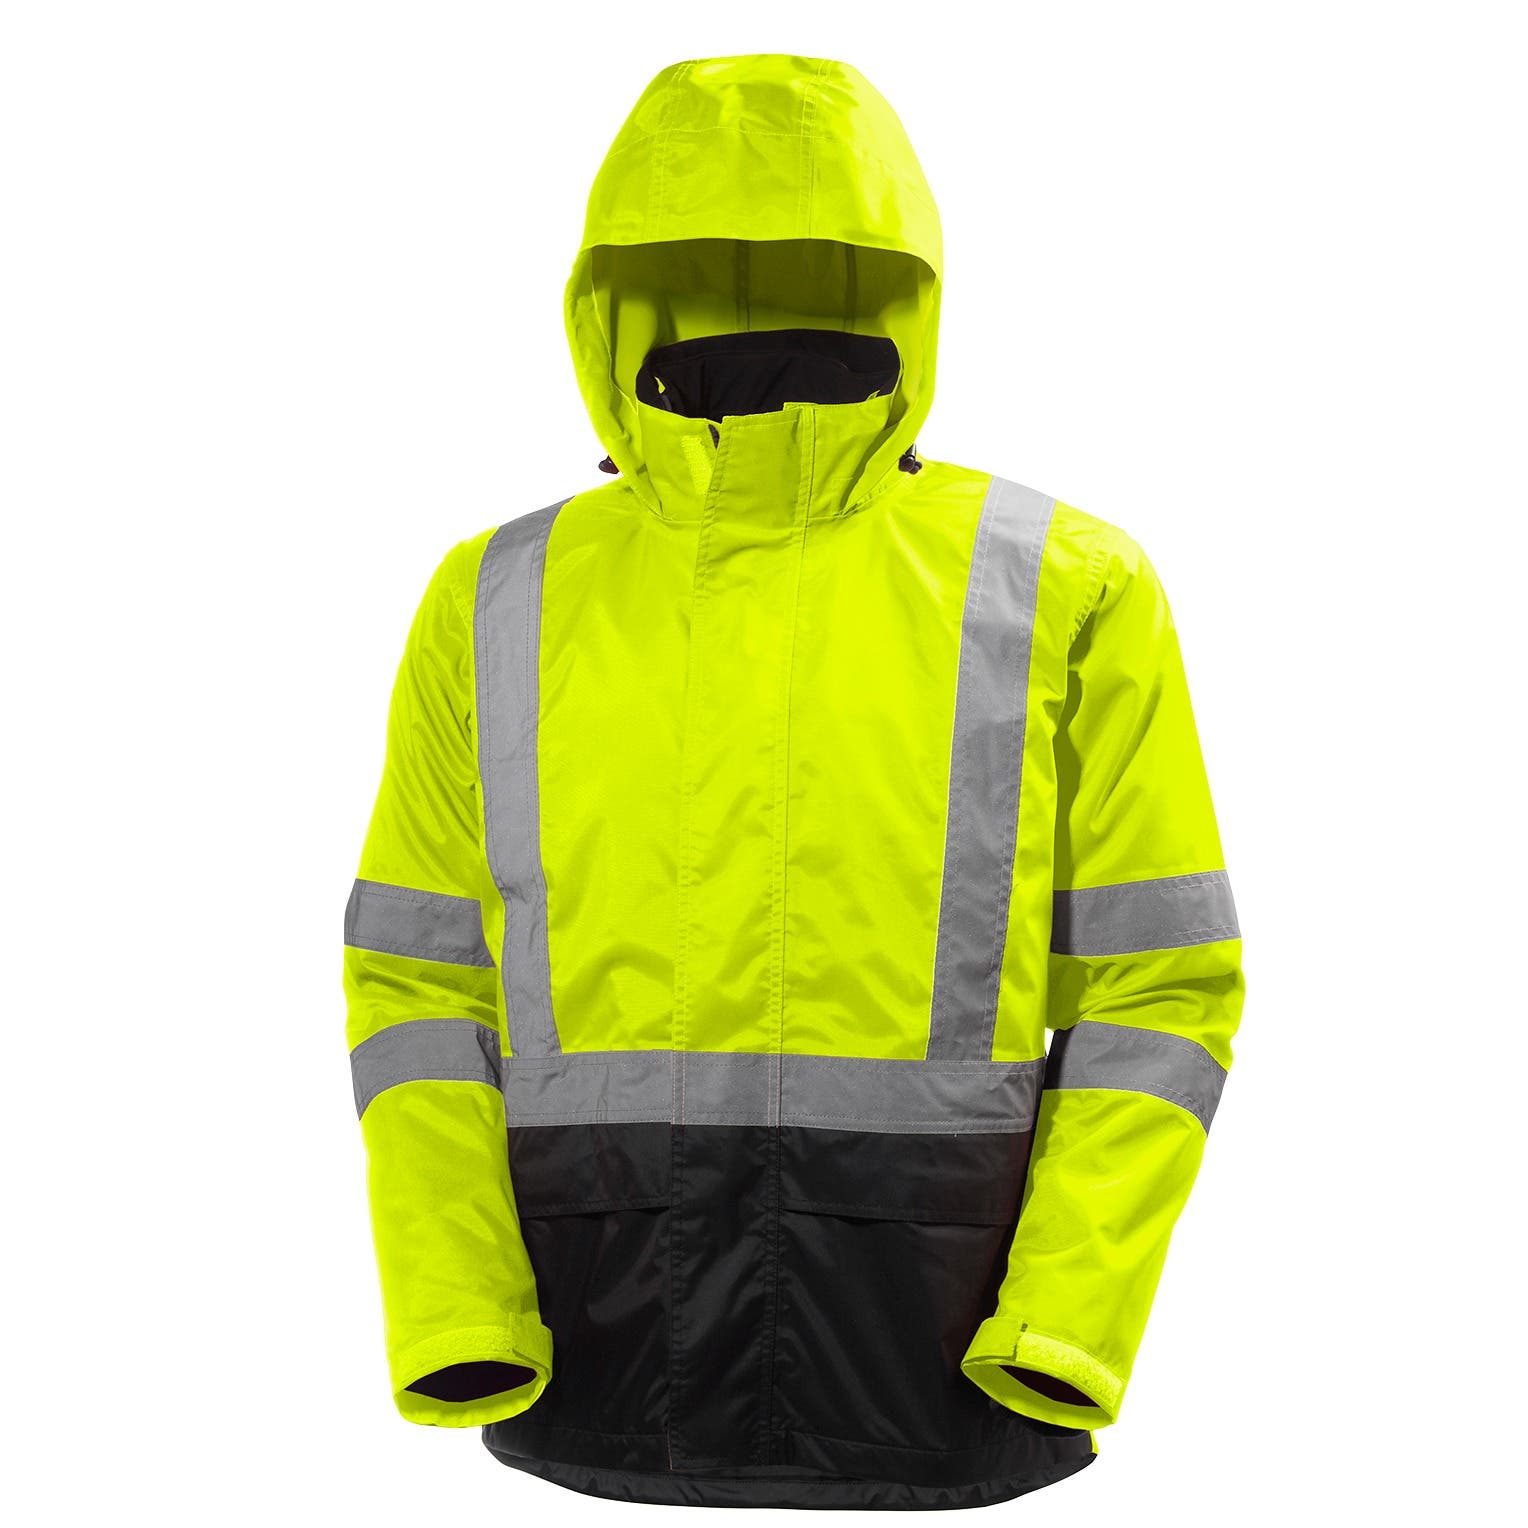 Helly Hansen Men's Alta Hi Vis Class 3 Shell Jacket in HV Yellow/Charcoal from the front